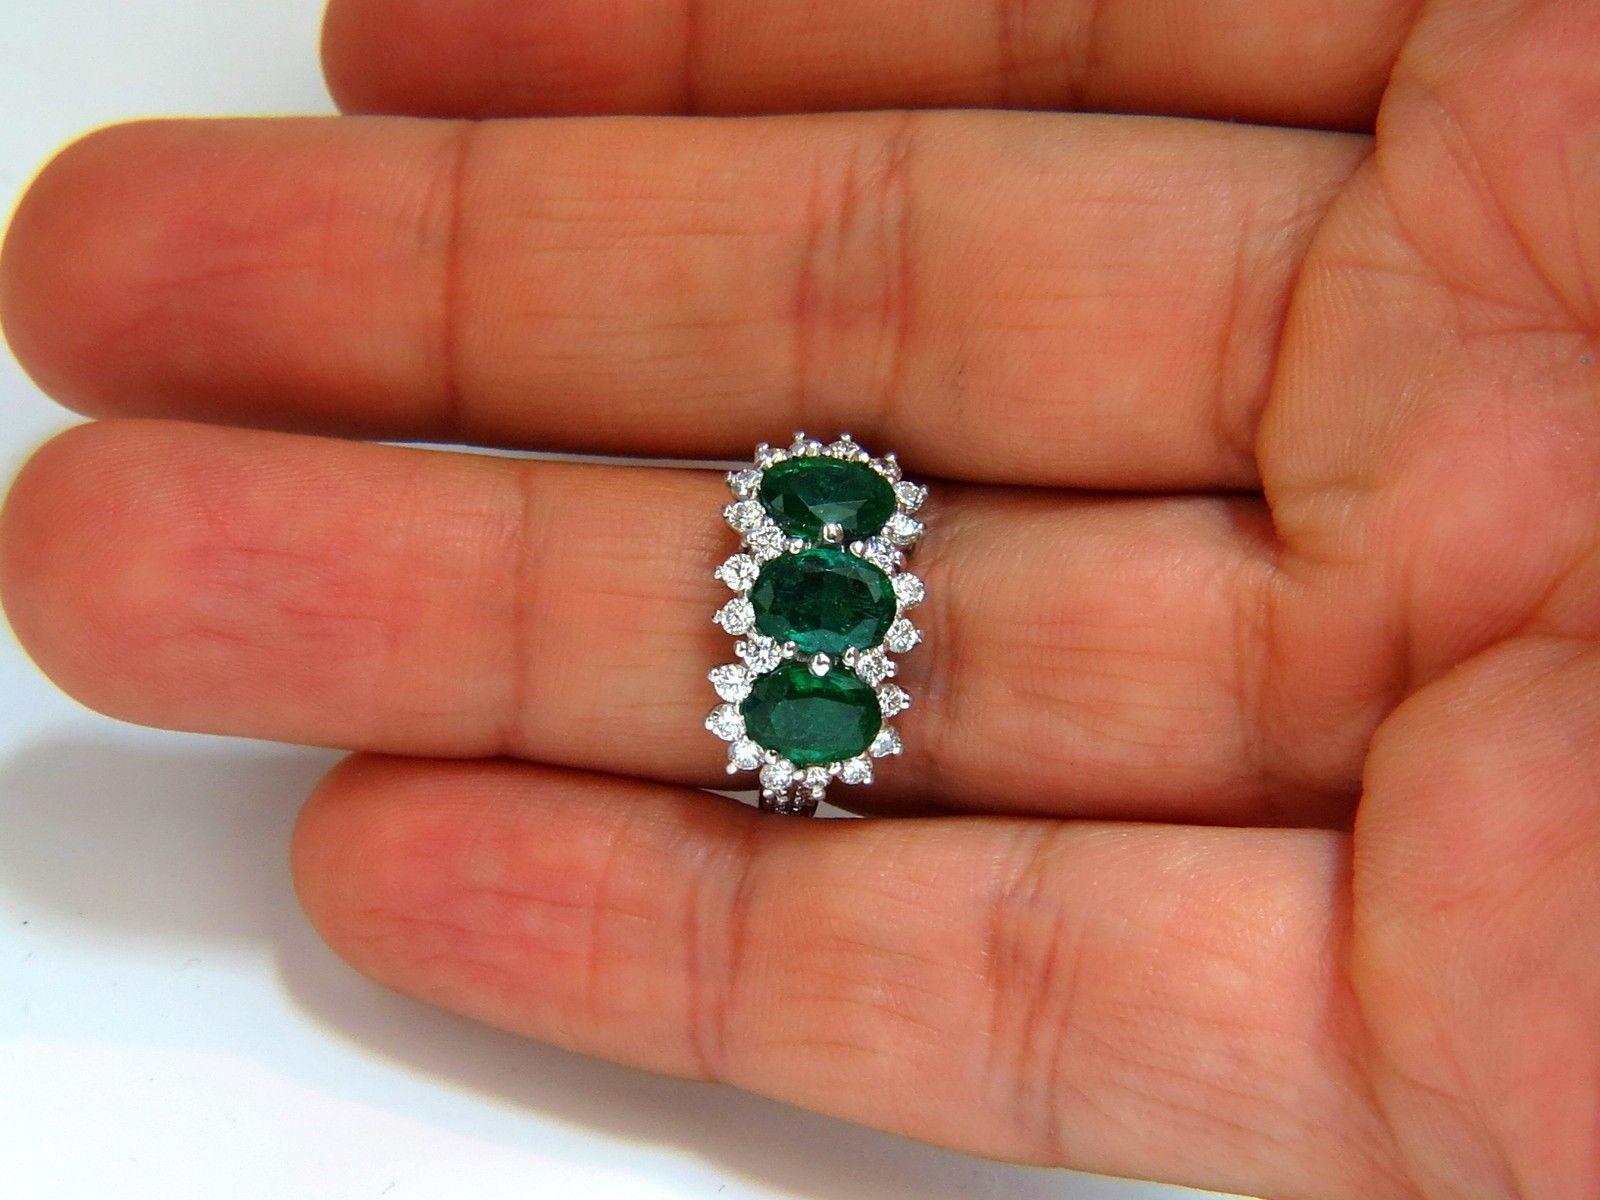 2.46ct. Natural Emeralds diamond ring

Handmade Mount

Center Emerald: 7.5 X 5.2mm

Sides: 7 X 5mm each.

Transparent & Clean clarity.

Vibrant Green tones.

Fully faceted oval cut brilliant

  

Side Round, full cut diamonds:

1.01ct. 

F/G colors,